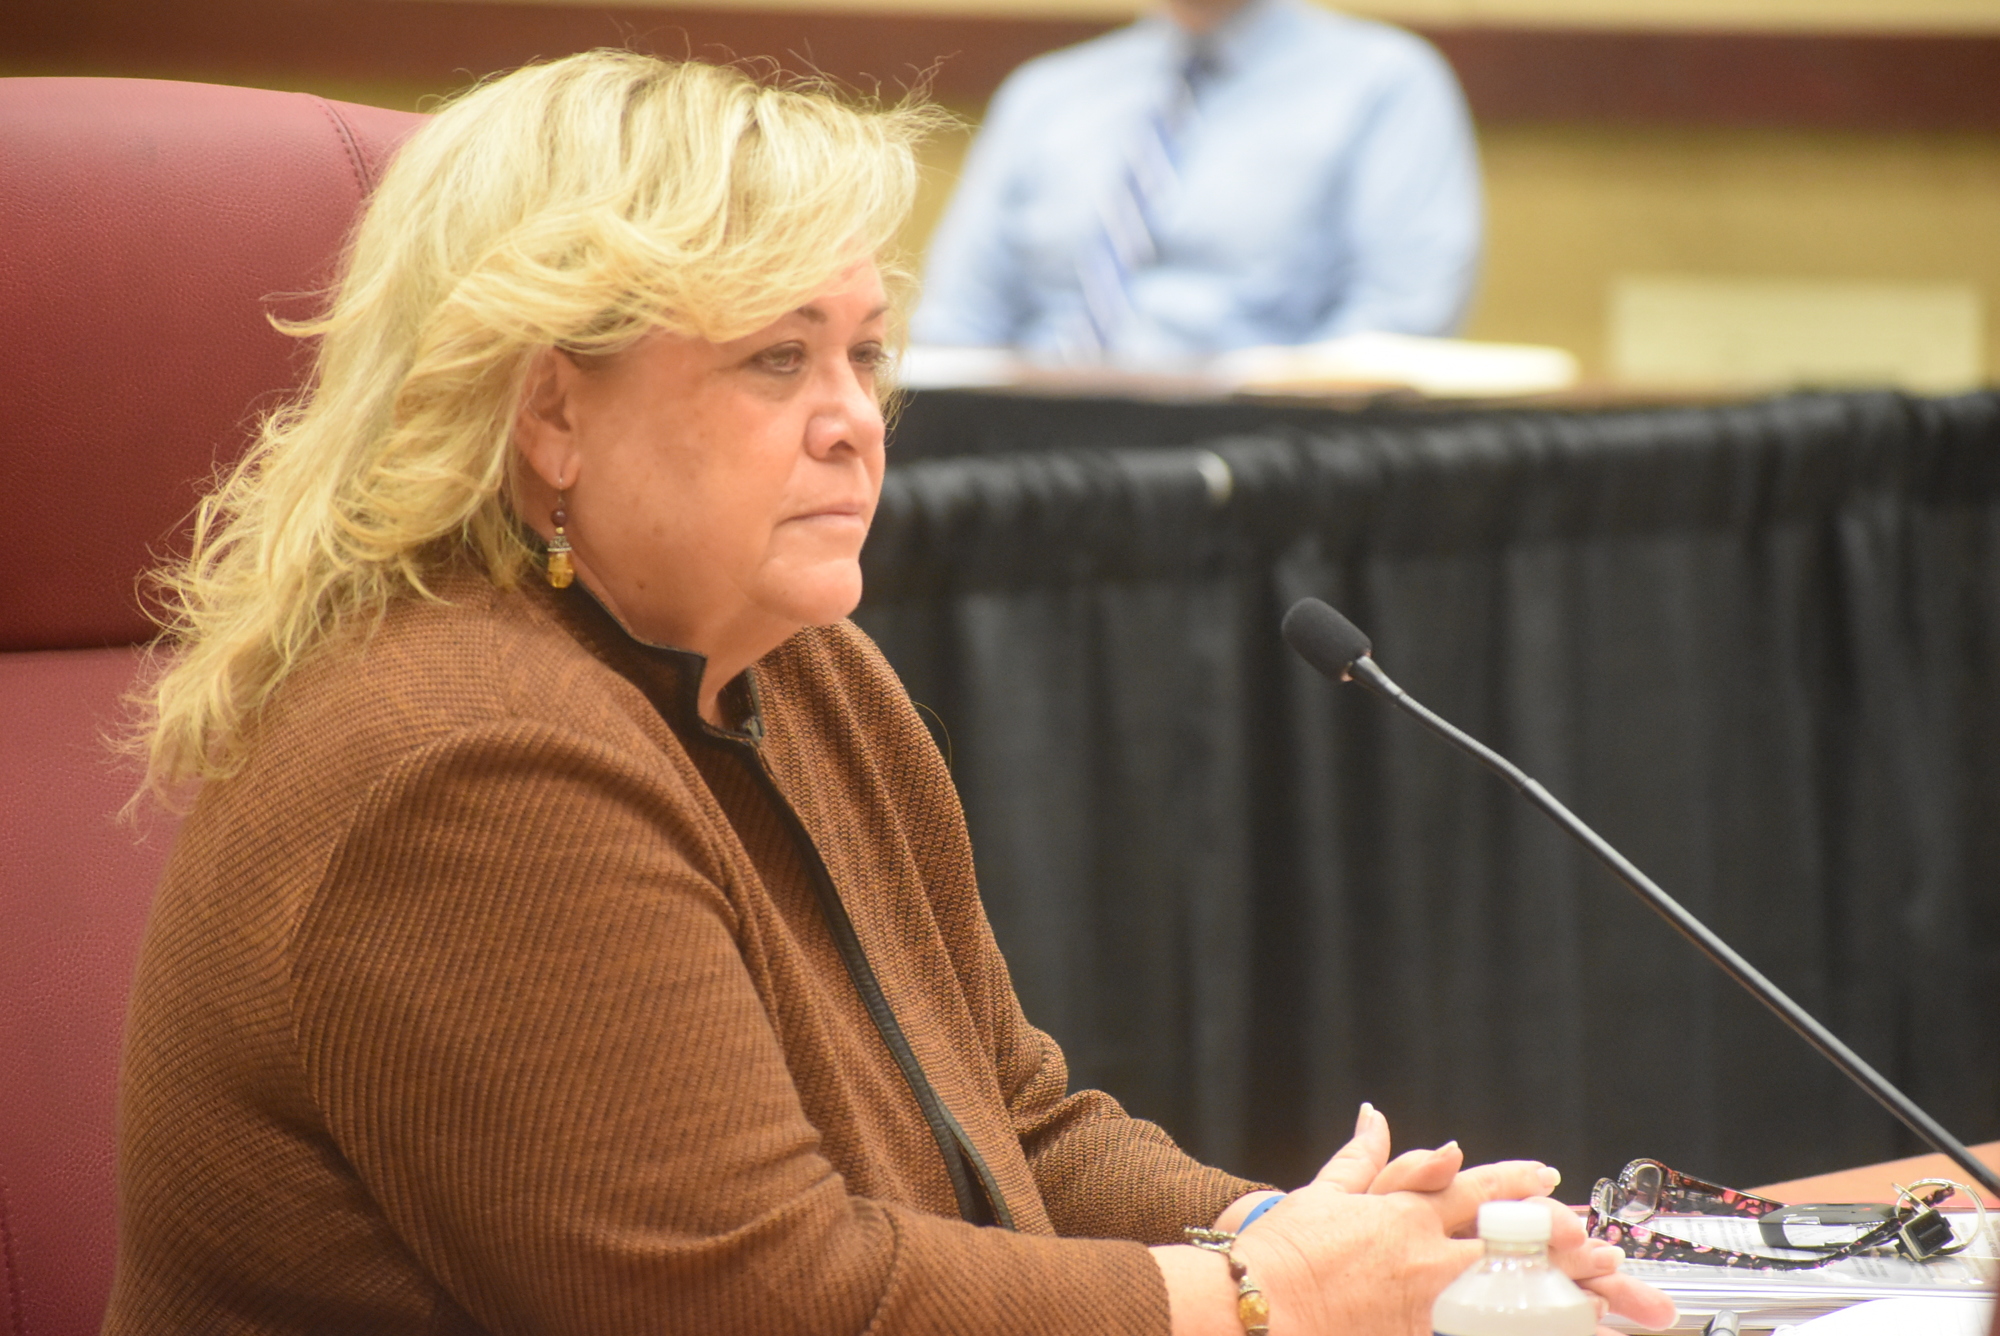 Manatee County commissioners voted unanimously not to consider terminating Administrator Cheri Coryea.